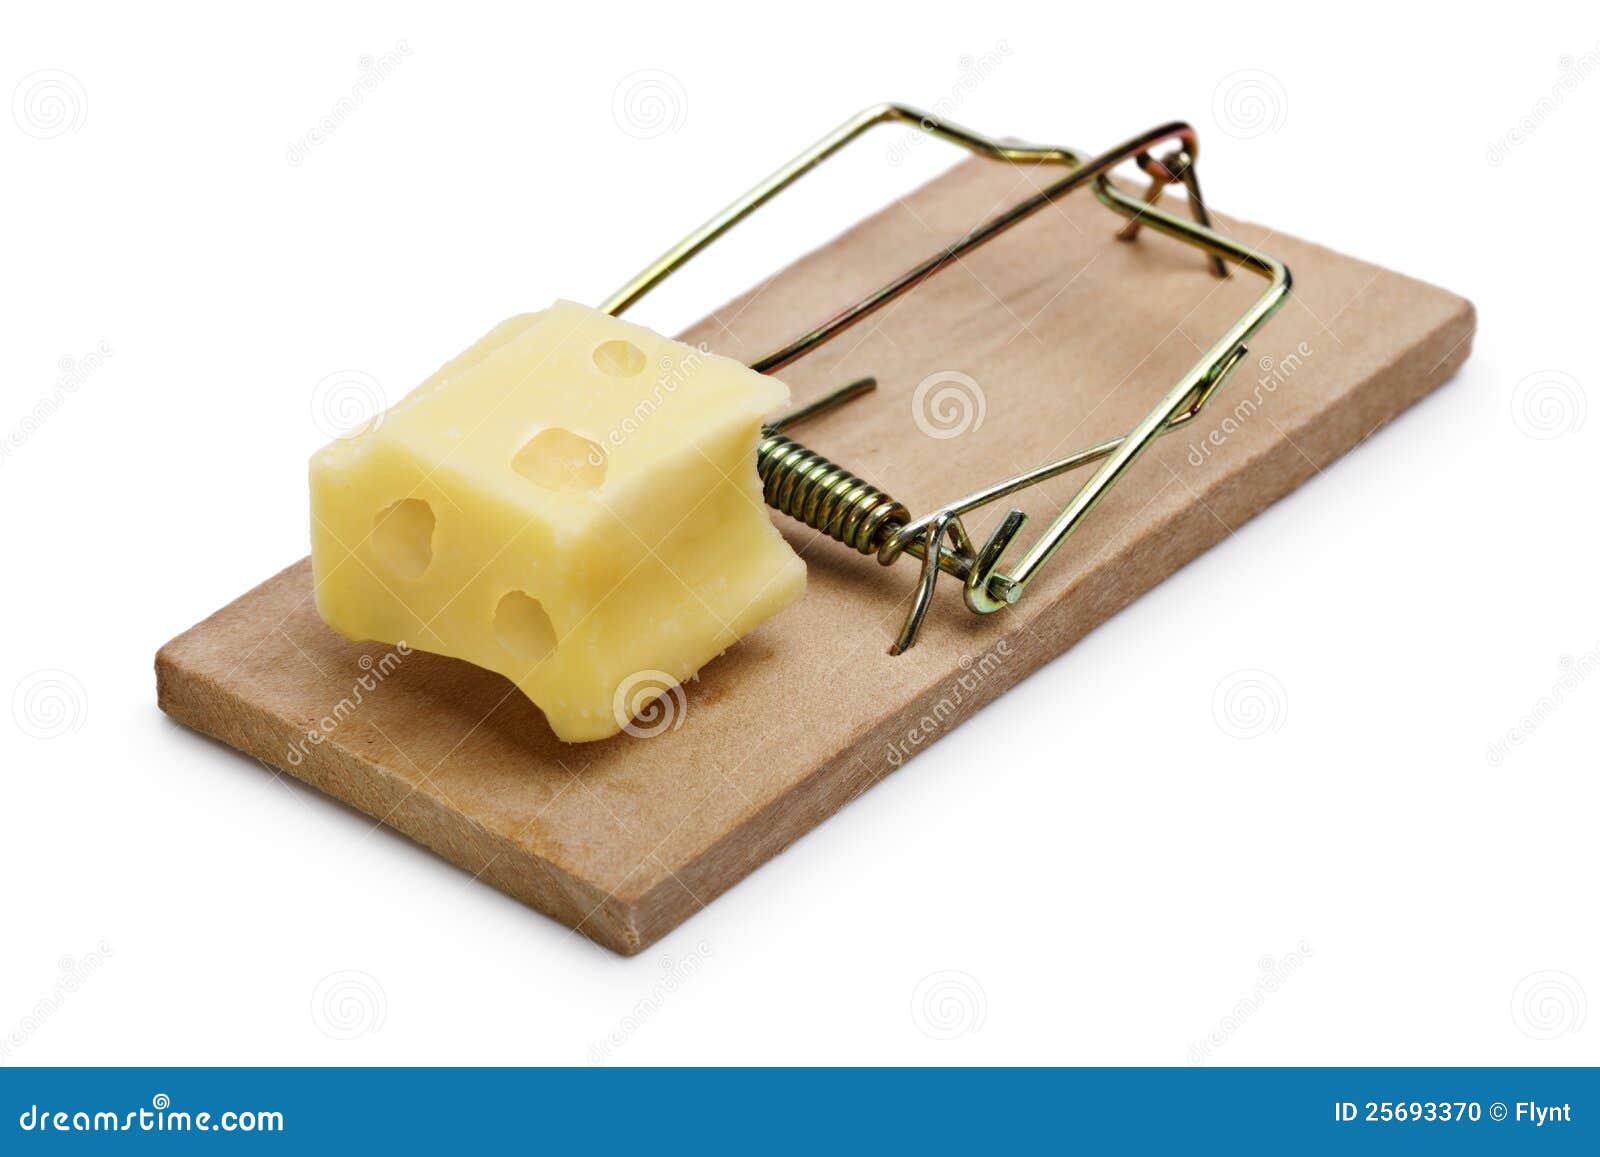 mousetrap with cheese incentive